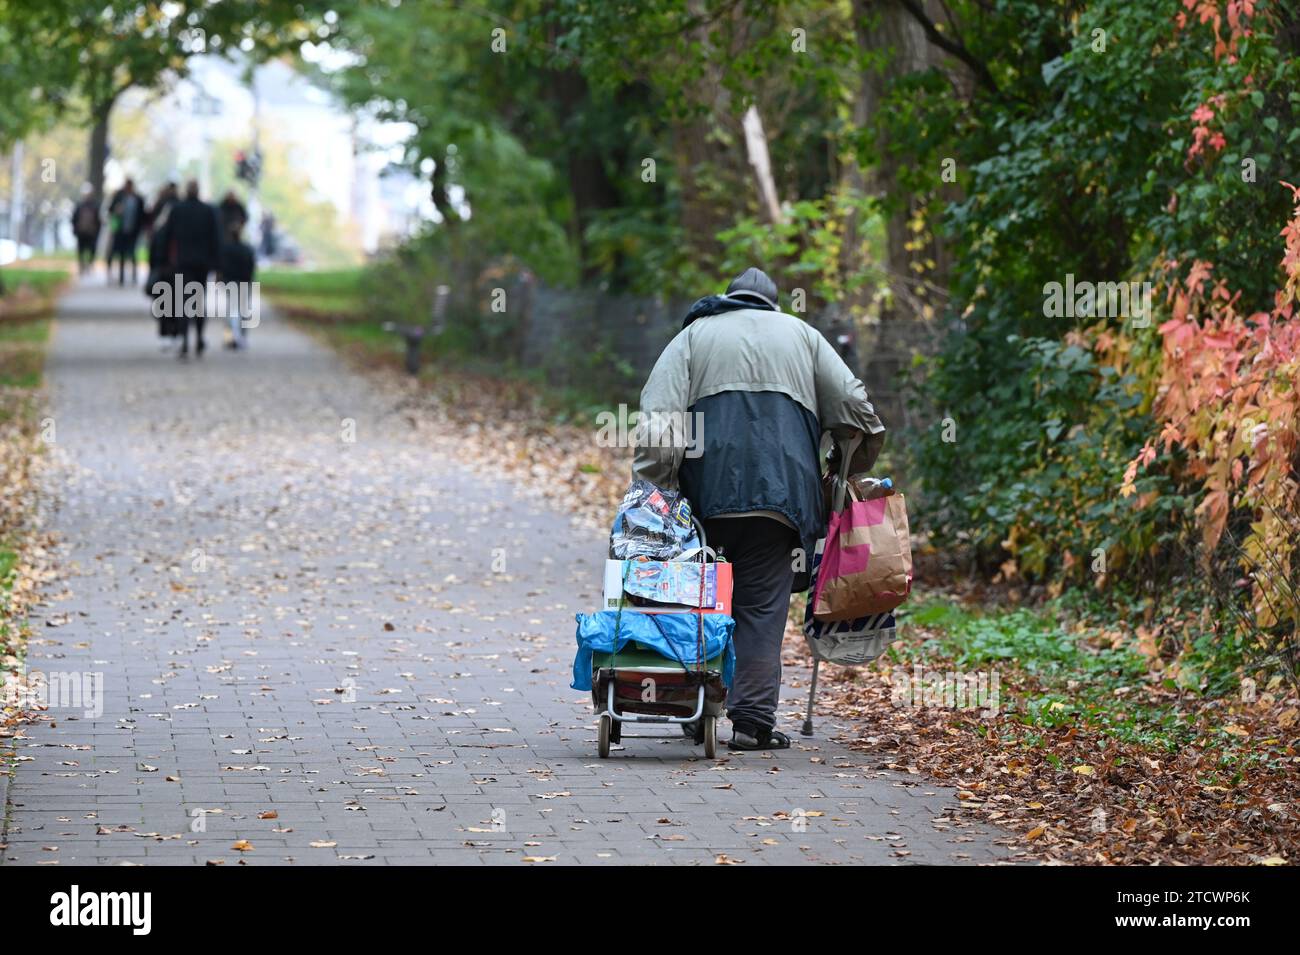 A homeless man from behind in a park in Hamburg, Germany Stock Photo